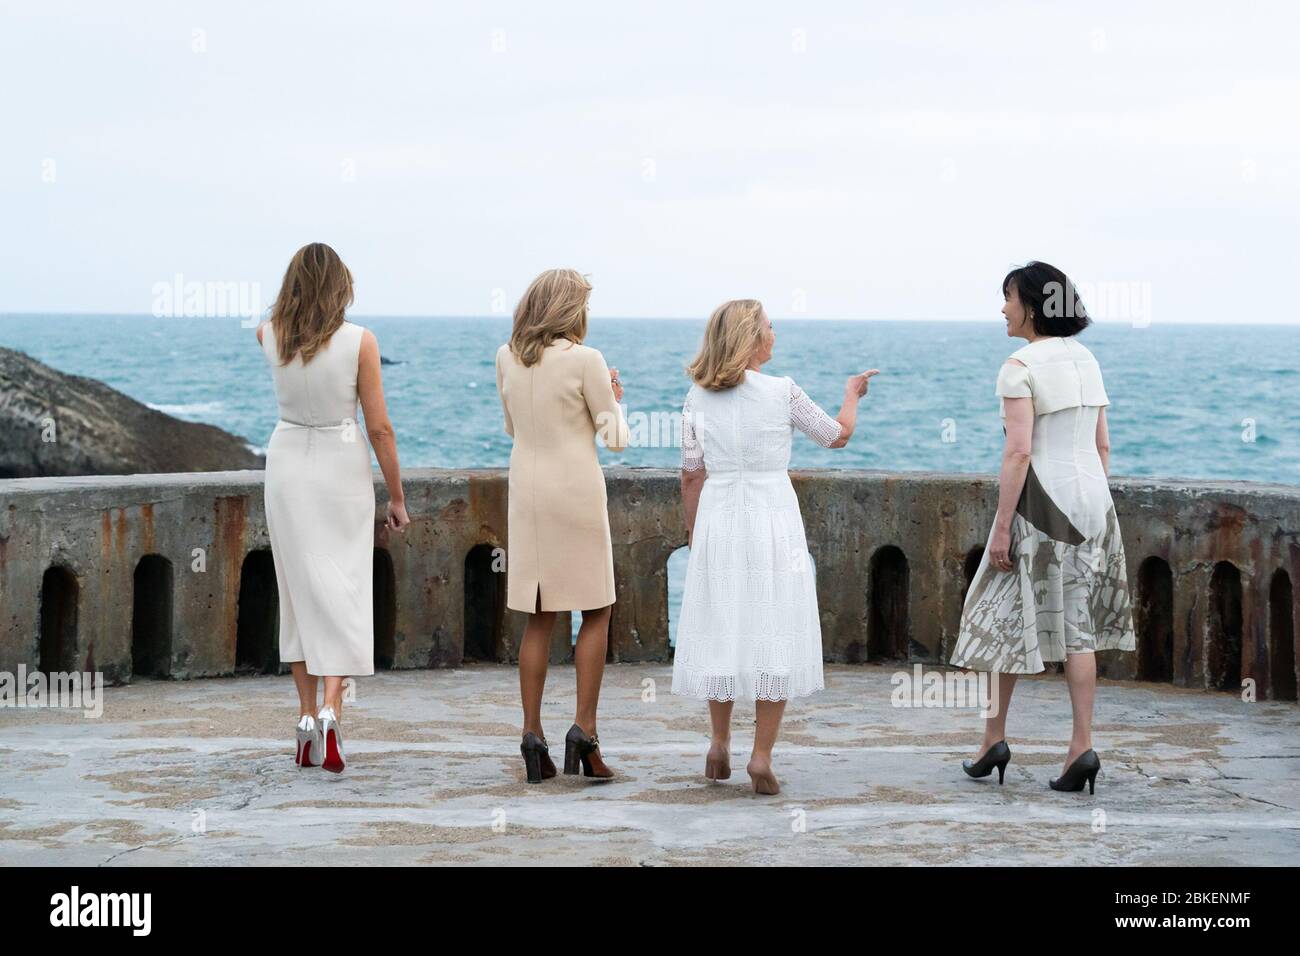 First Lady Melania Trump walks with Mrs. Brigitte Macron, wife of President Emmanuel Macron of France, Mrs. Malgorzata Tusk, wife of European Council President Donald Tusk, and Mrs. Akie Abe, wife of the Prime Minister of Japan Shinzo Abe, during the G7 Summit Saturday, Aug. 24, 2019, at the Rocher de la Vierge in Biarritz, France. #G7Biarritz Stock Photo